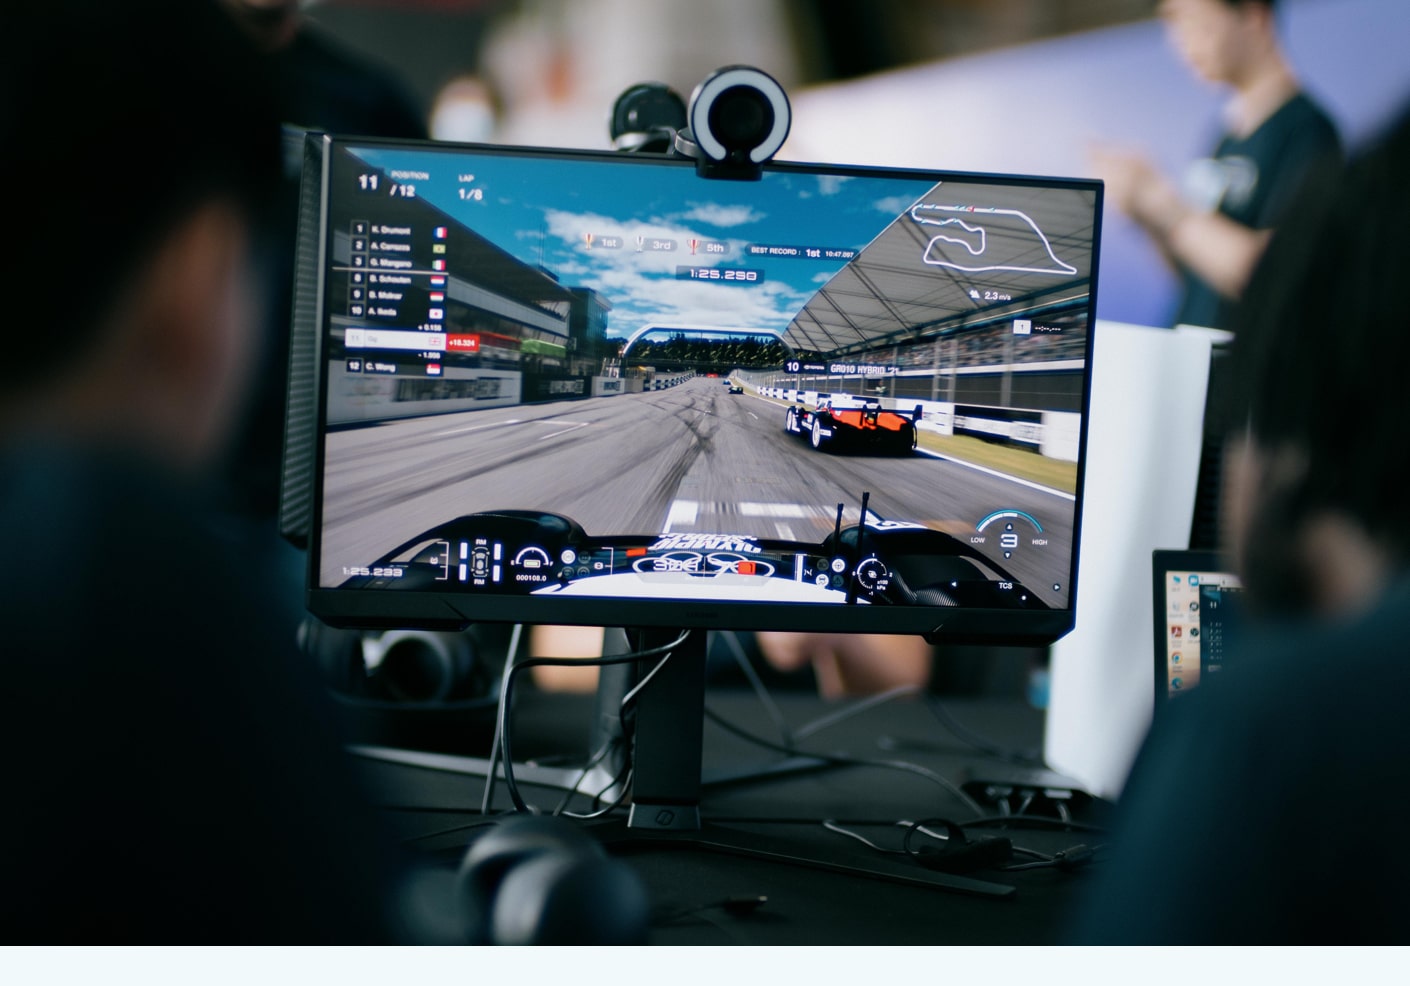 A screen showing a scene from the video game Gran Turismo.